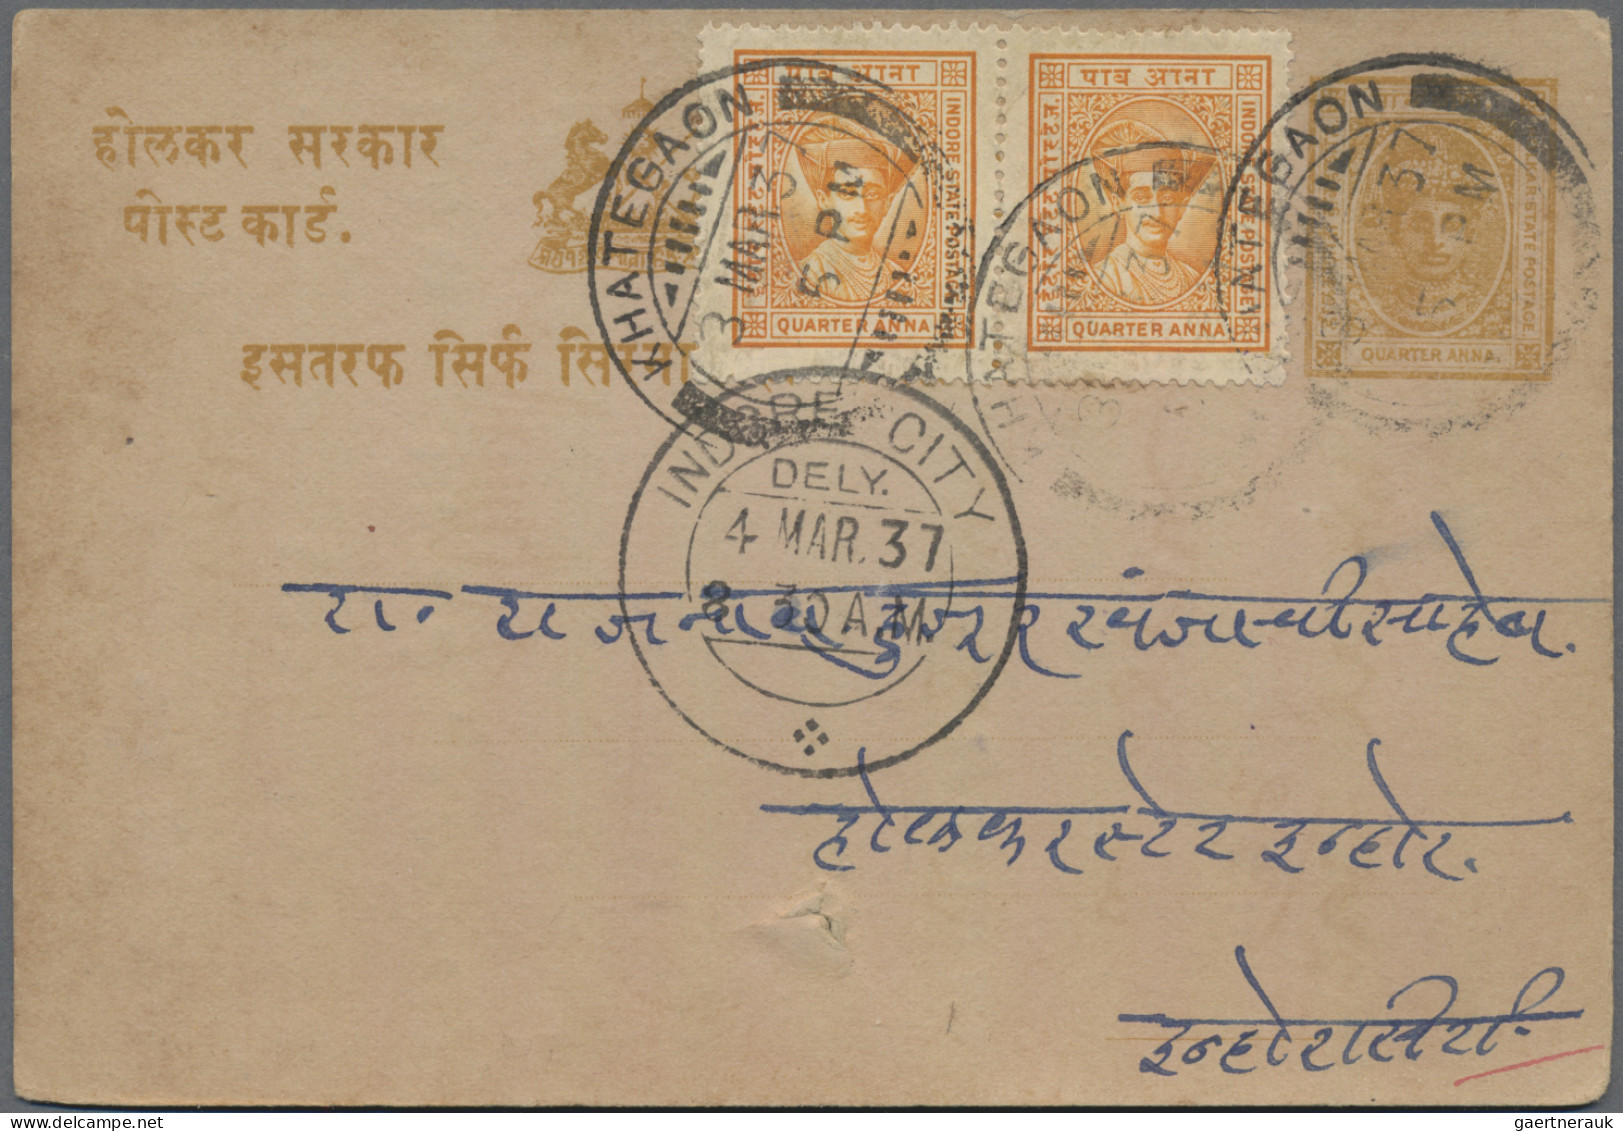 Indore: 1920/1960: "Indore Postmarks": Collection of more than 100 postal statio